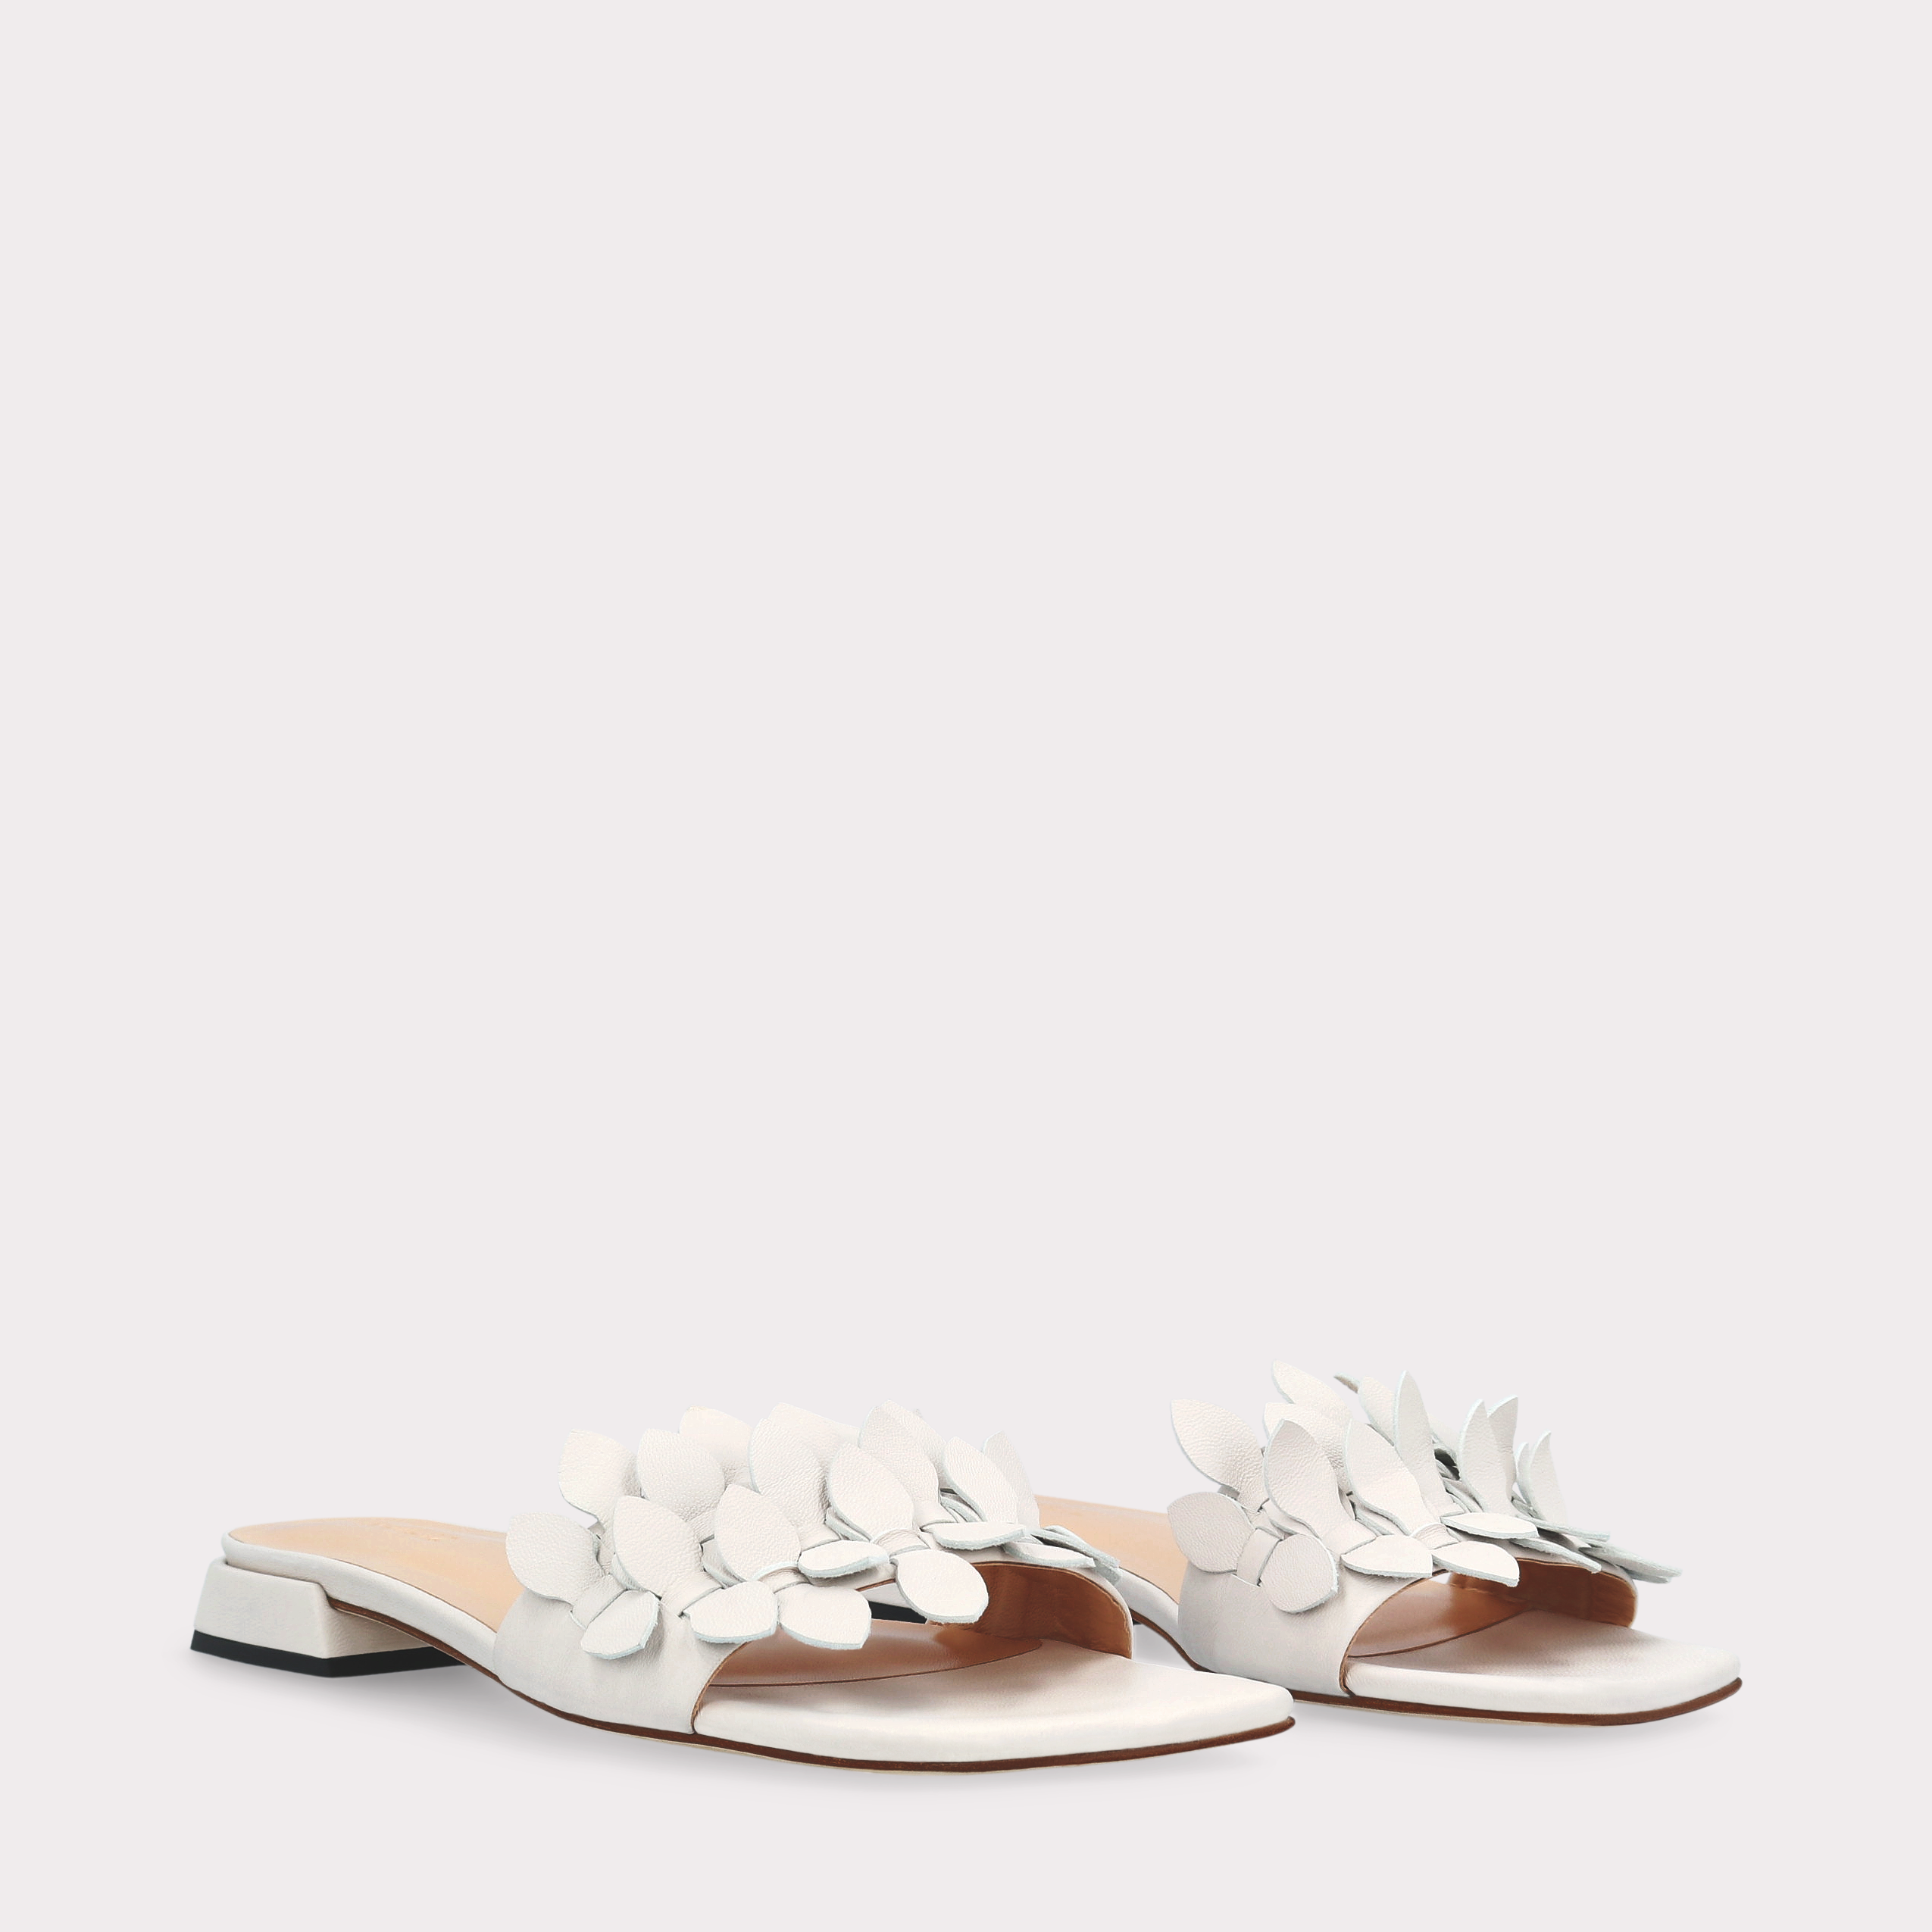 POLLY 01 IVORY LEATHER MULES